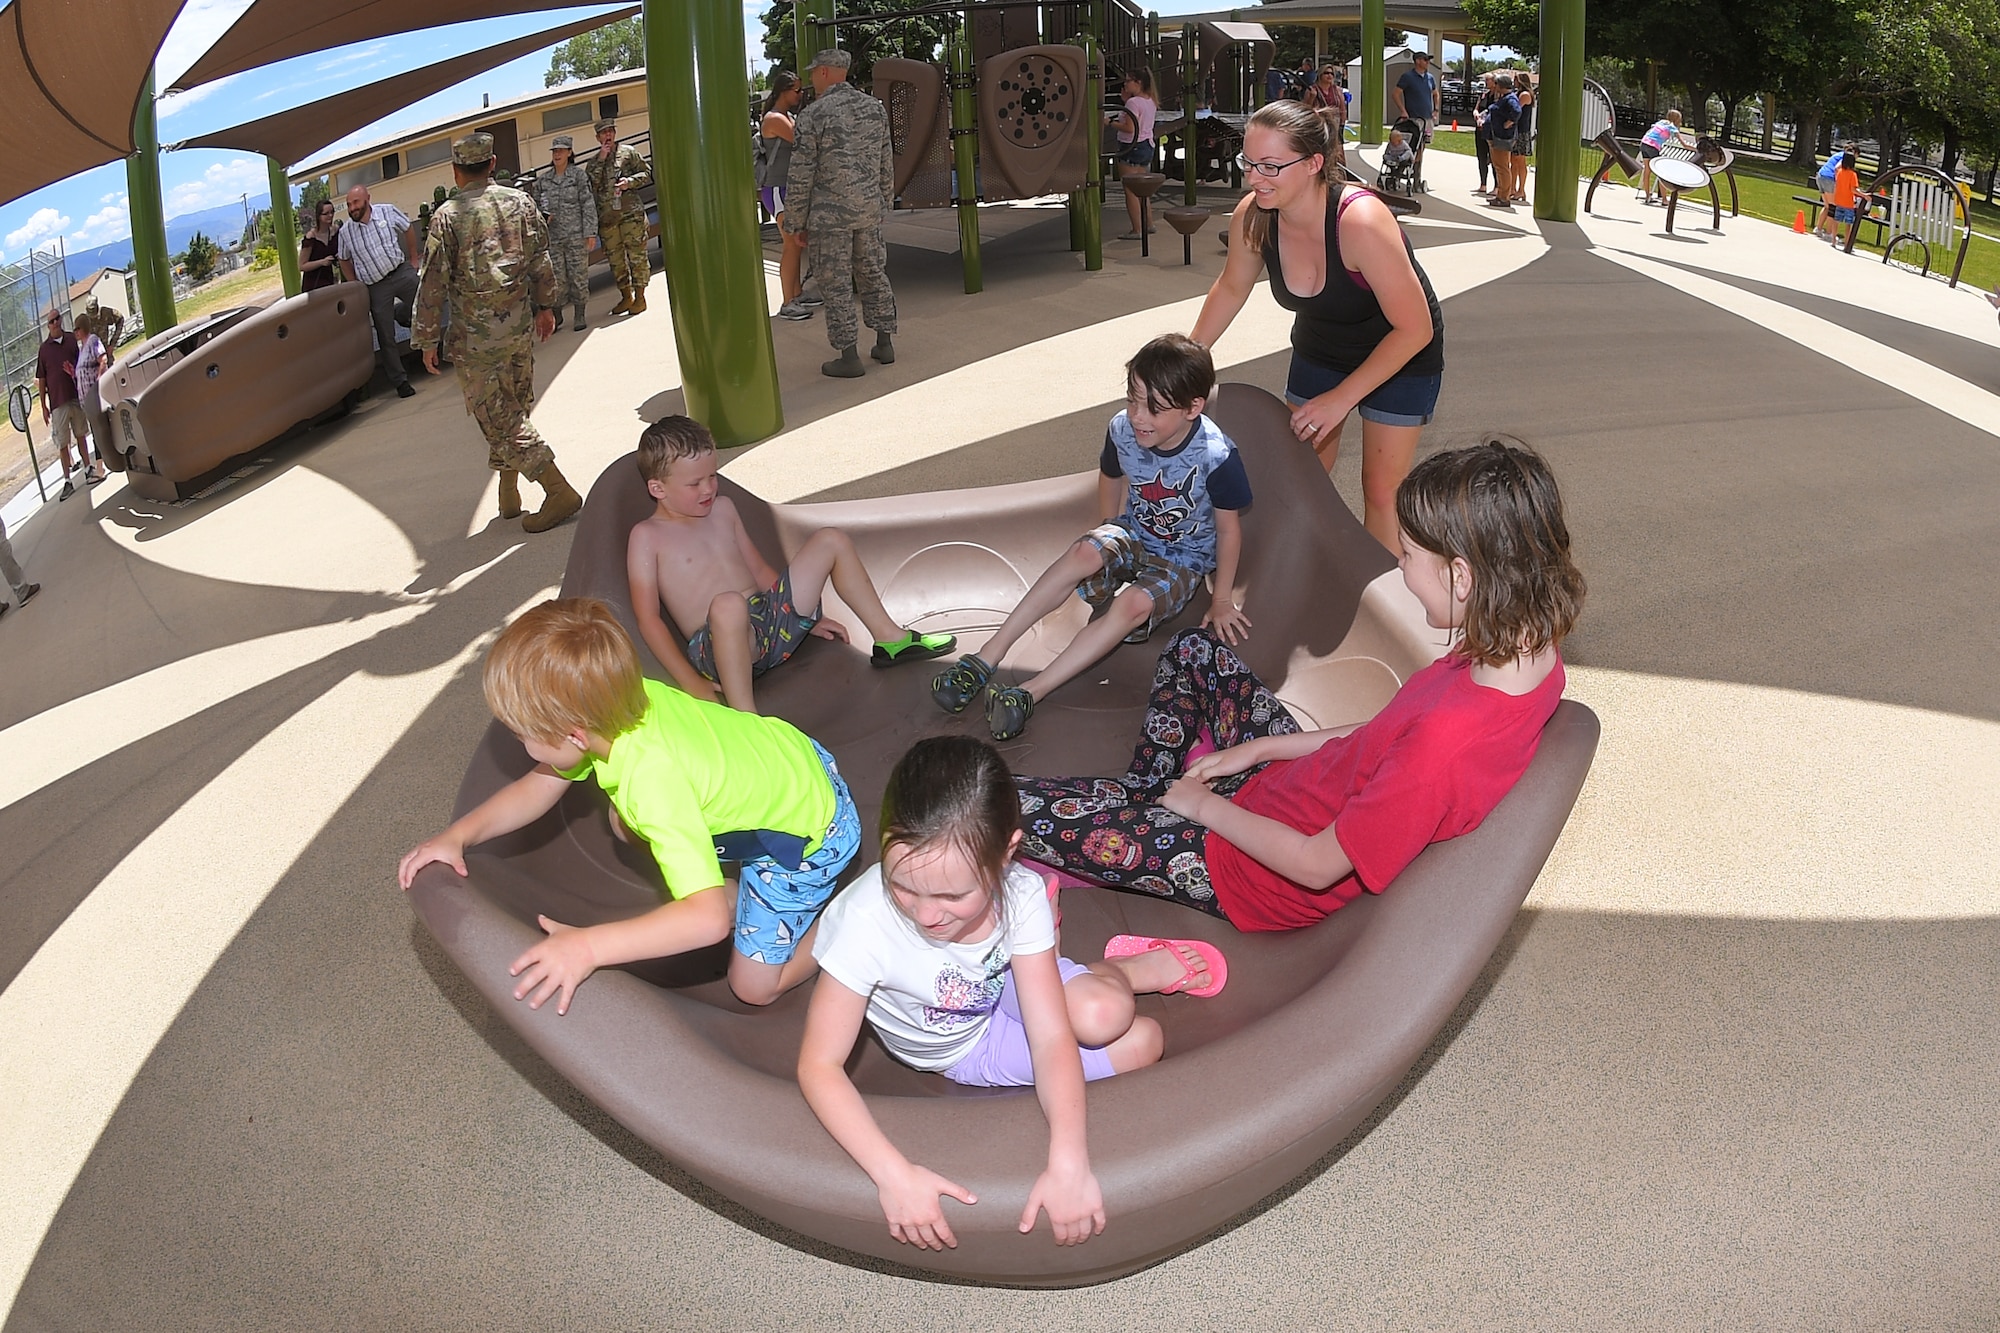 Rebecca McBride plays with children on the merry go-round at the new, all-abilities playground at Centennial Park June 24, 2019, at Hill Air Force Base, Utah. The playground is wheelchair accessible and incorporates sensory areas with a mixture of music- and texture-focused equipment for children. (U.S. Air Force photo by Todd Cromar)